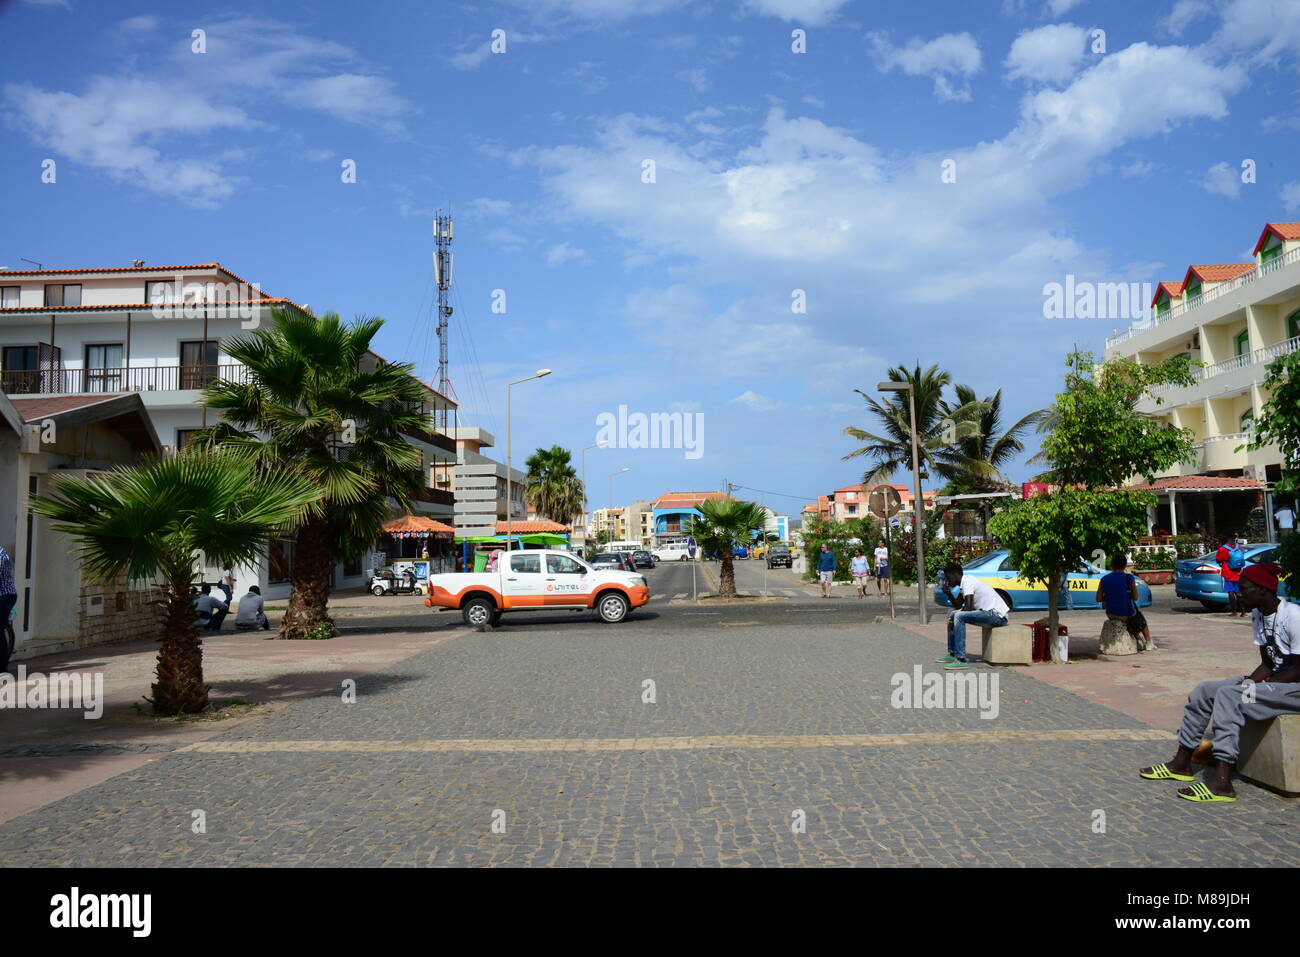 Street in the center of Santa Maria town, on Sal Island, in Cape Verde (Africa). Cape Verde is a former Portuguese colony in the Atlantic Ocean. Stock Photo